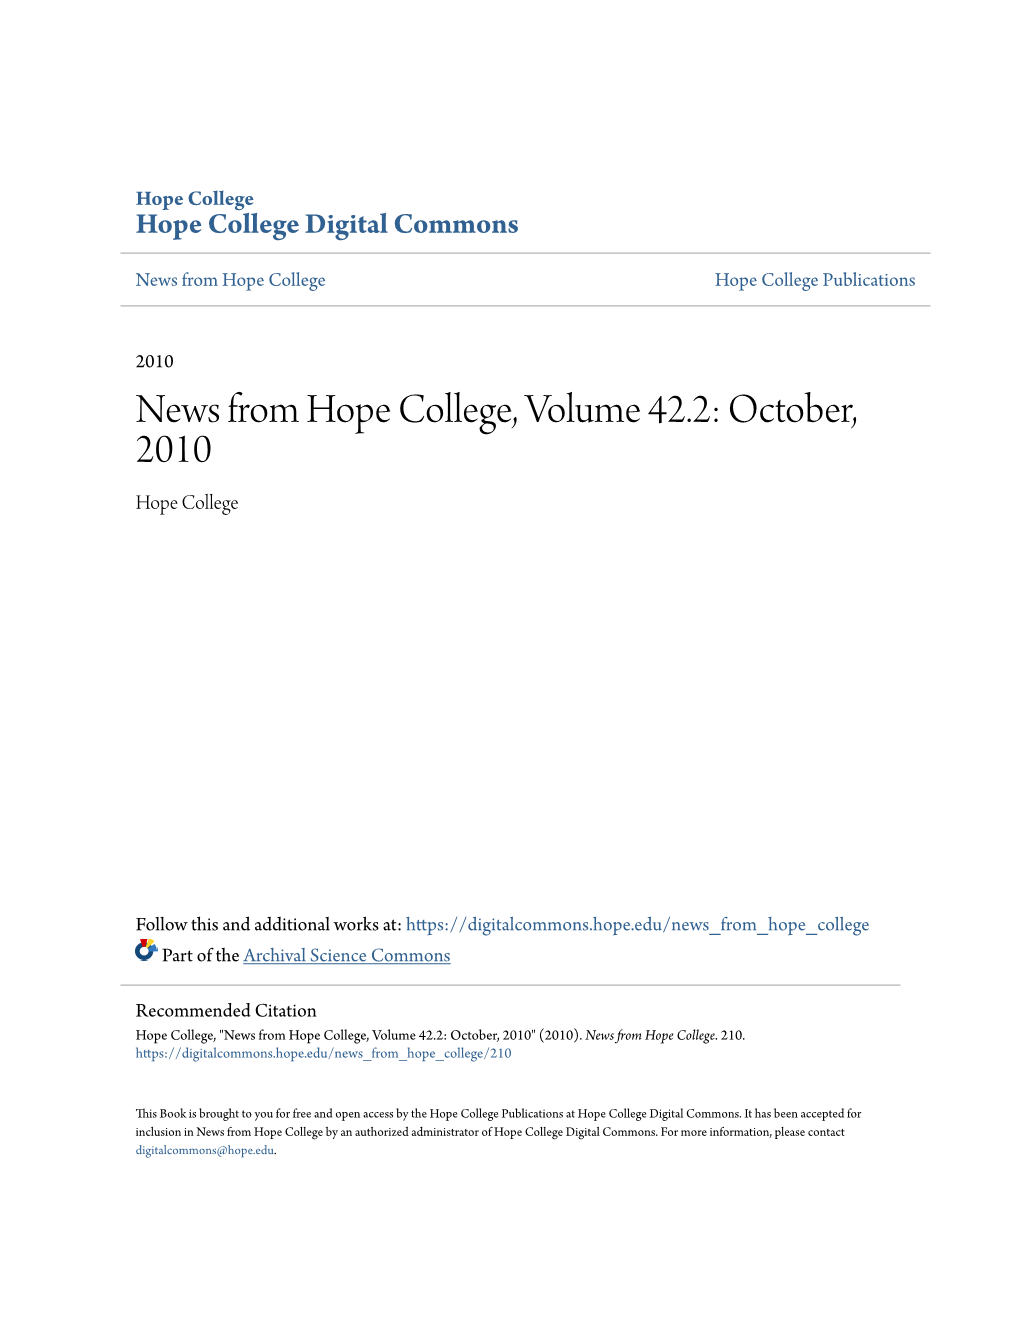 News from Hope College, Volume 42.2: October, 2010 Hope College